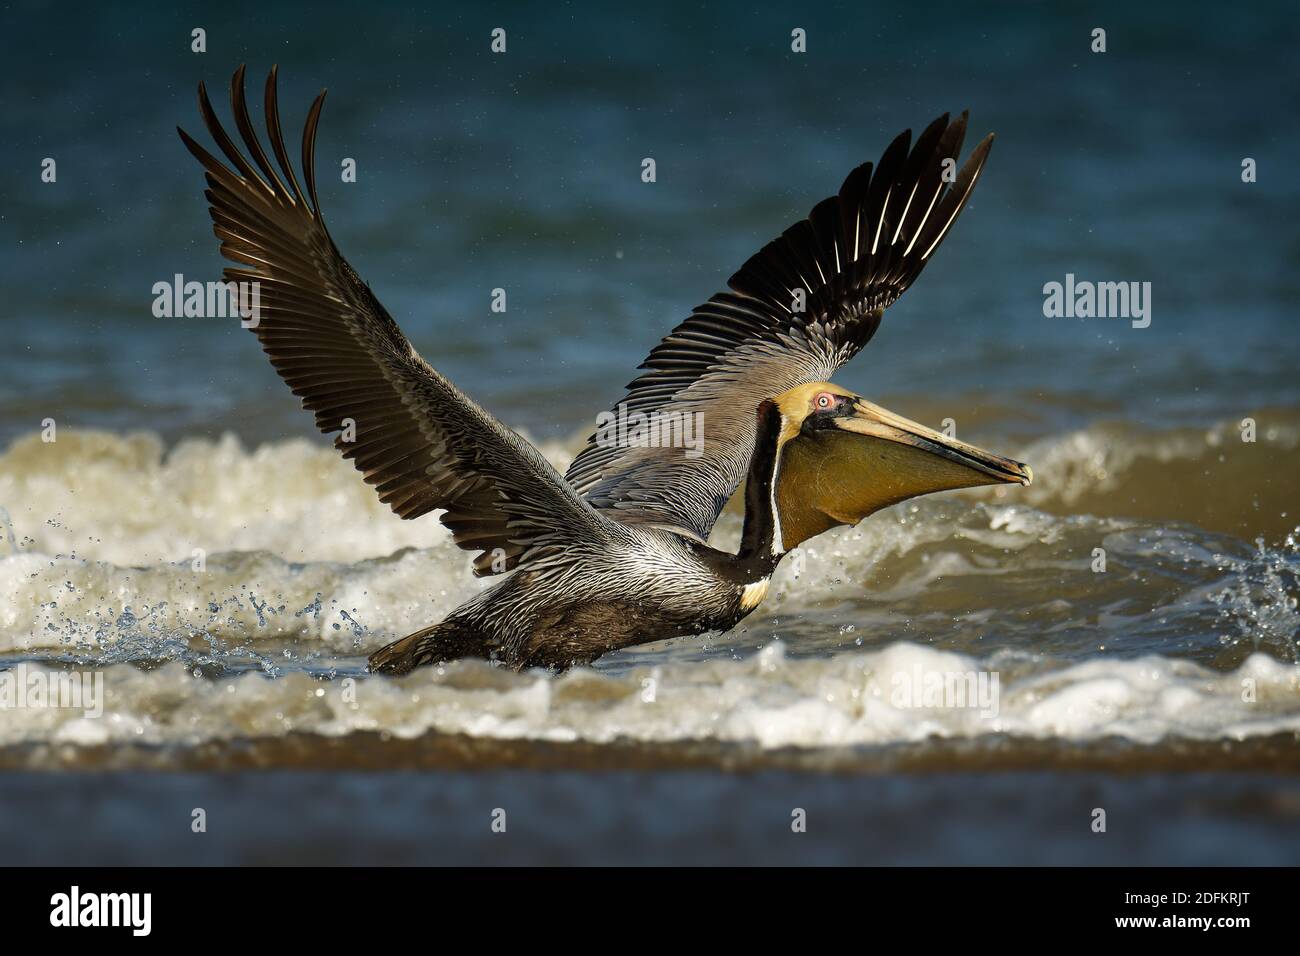 Brown pelican - Pelecanus occidentalis big bird of the pelican family, Pelecanidae, feed and hunt by diving into water. Flying and fishing, kamikaze t Stock Photo